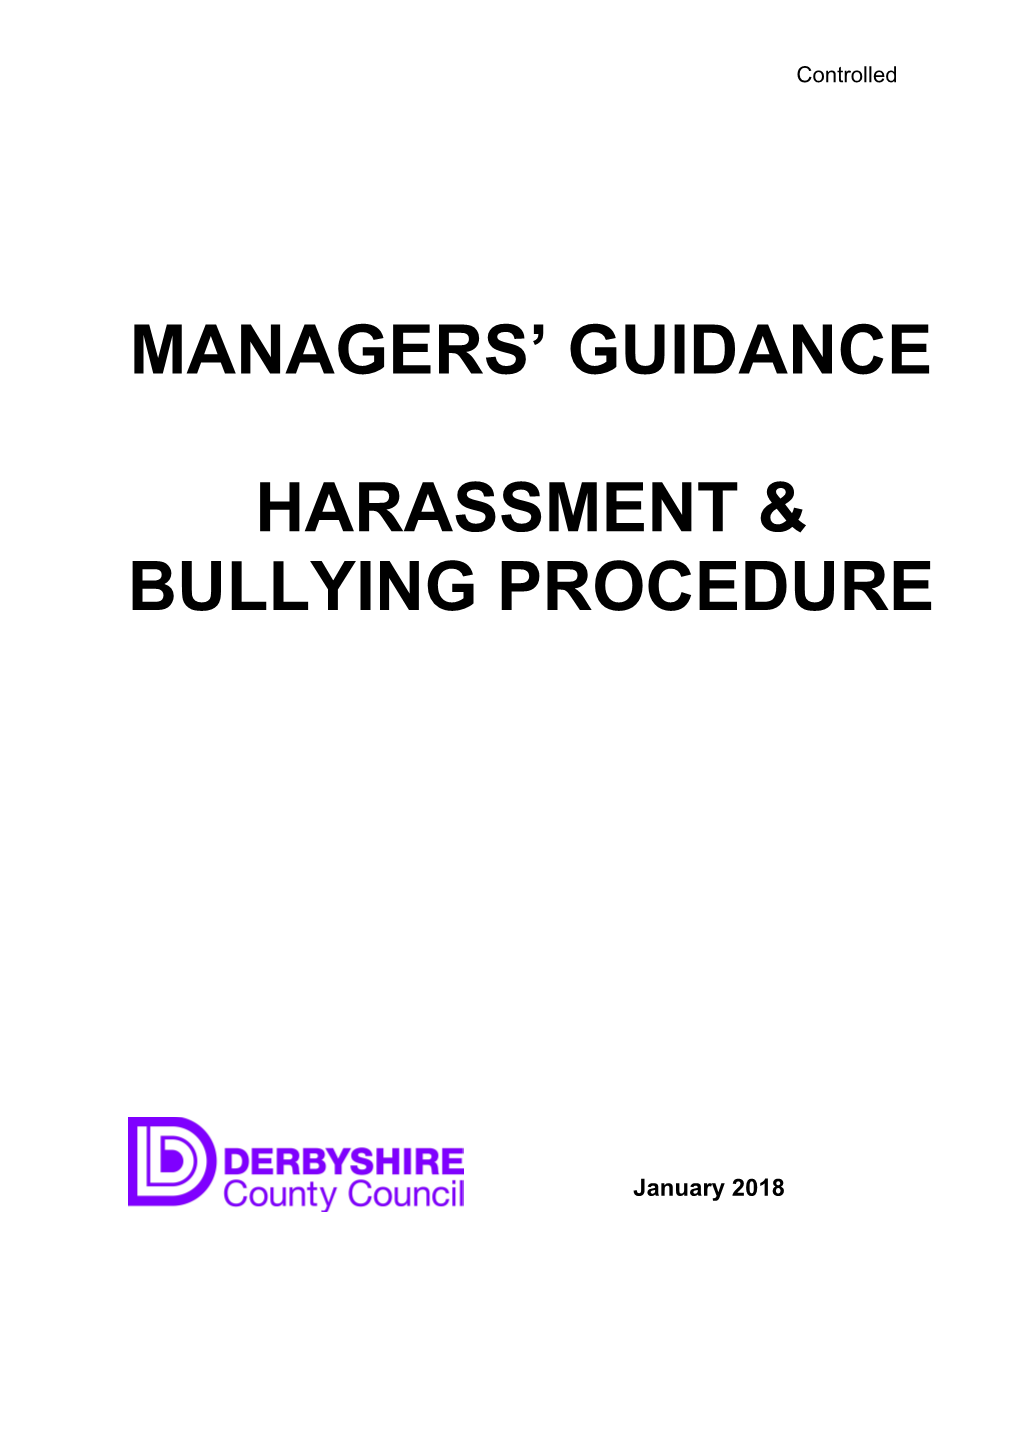 Guidance on the Harassment & Bullying Procedure